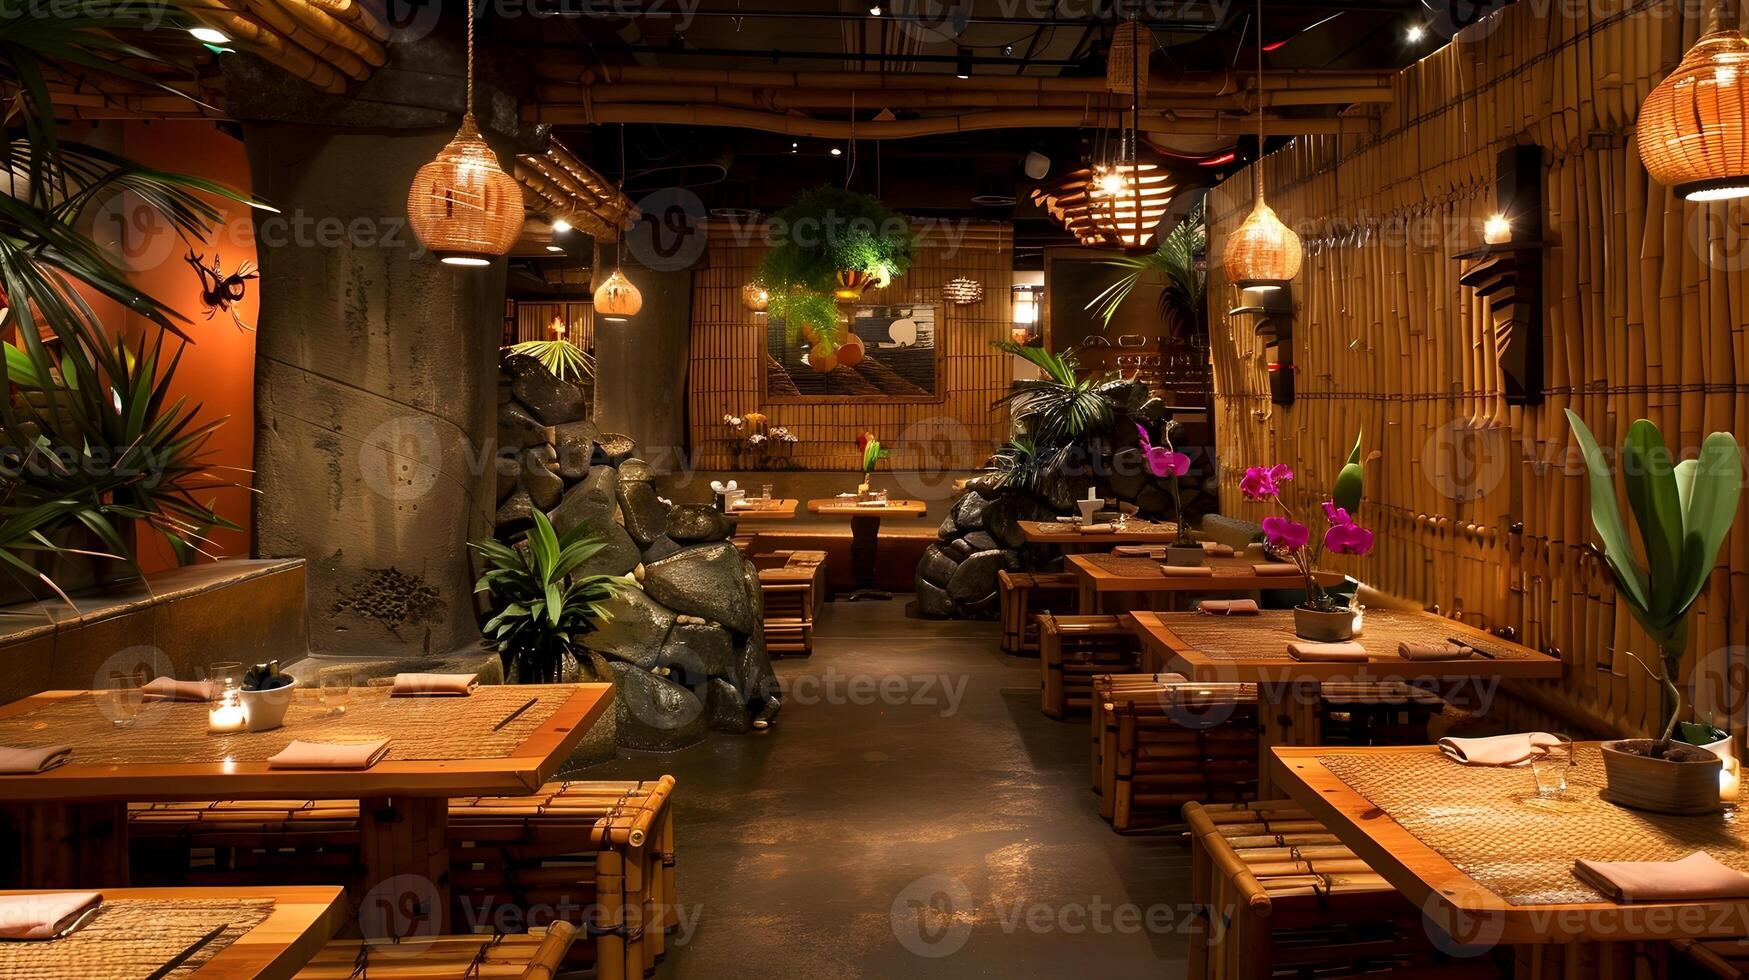 Cozy and Inviting Southeast Asian-Inspired Restaurant Interior with Rustic Wooden Furnishings and Tropical Accents photo